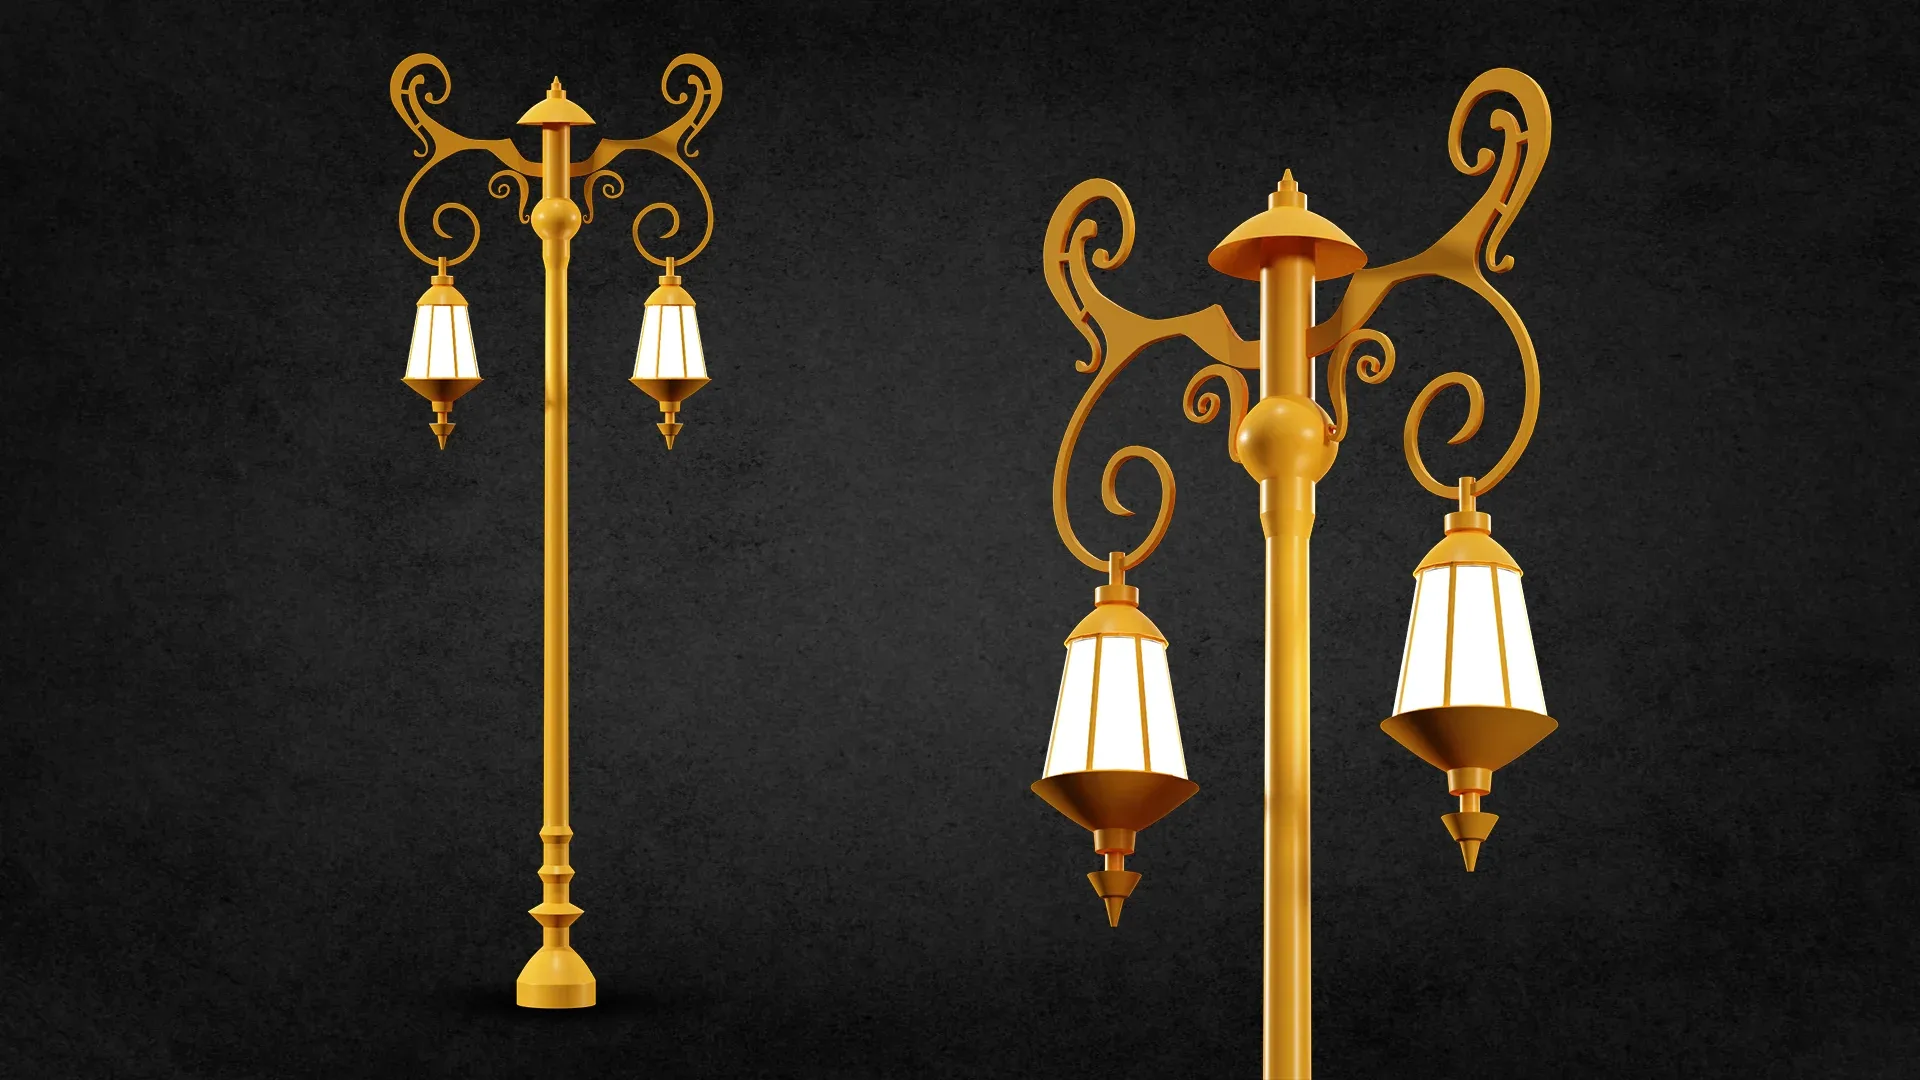 10 street lamps base mesh / Low Poly /  Mid Poly / Game Ready vol 02